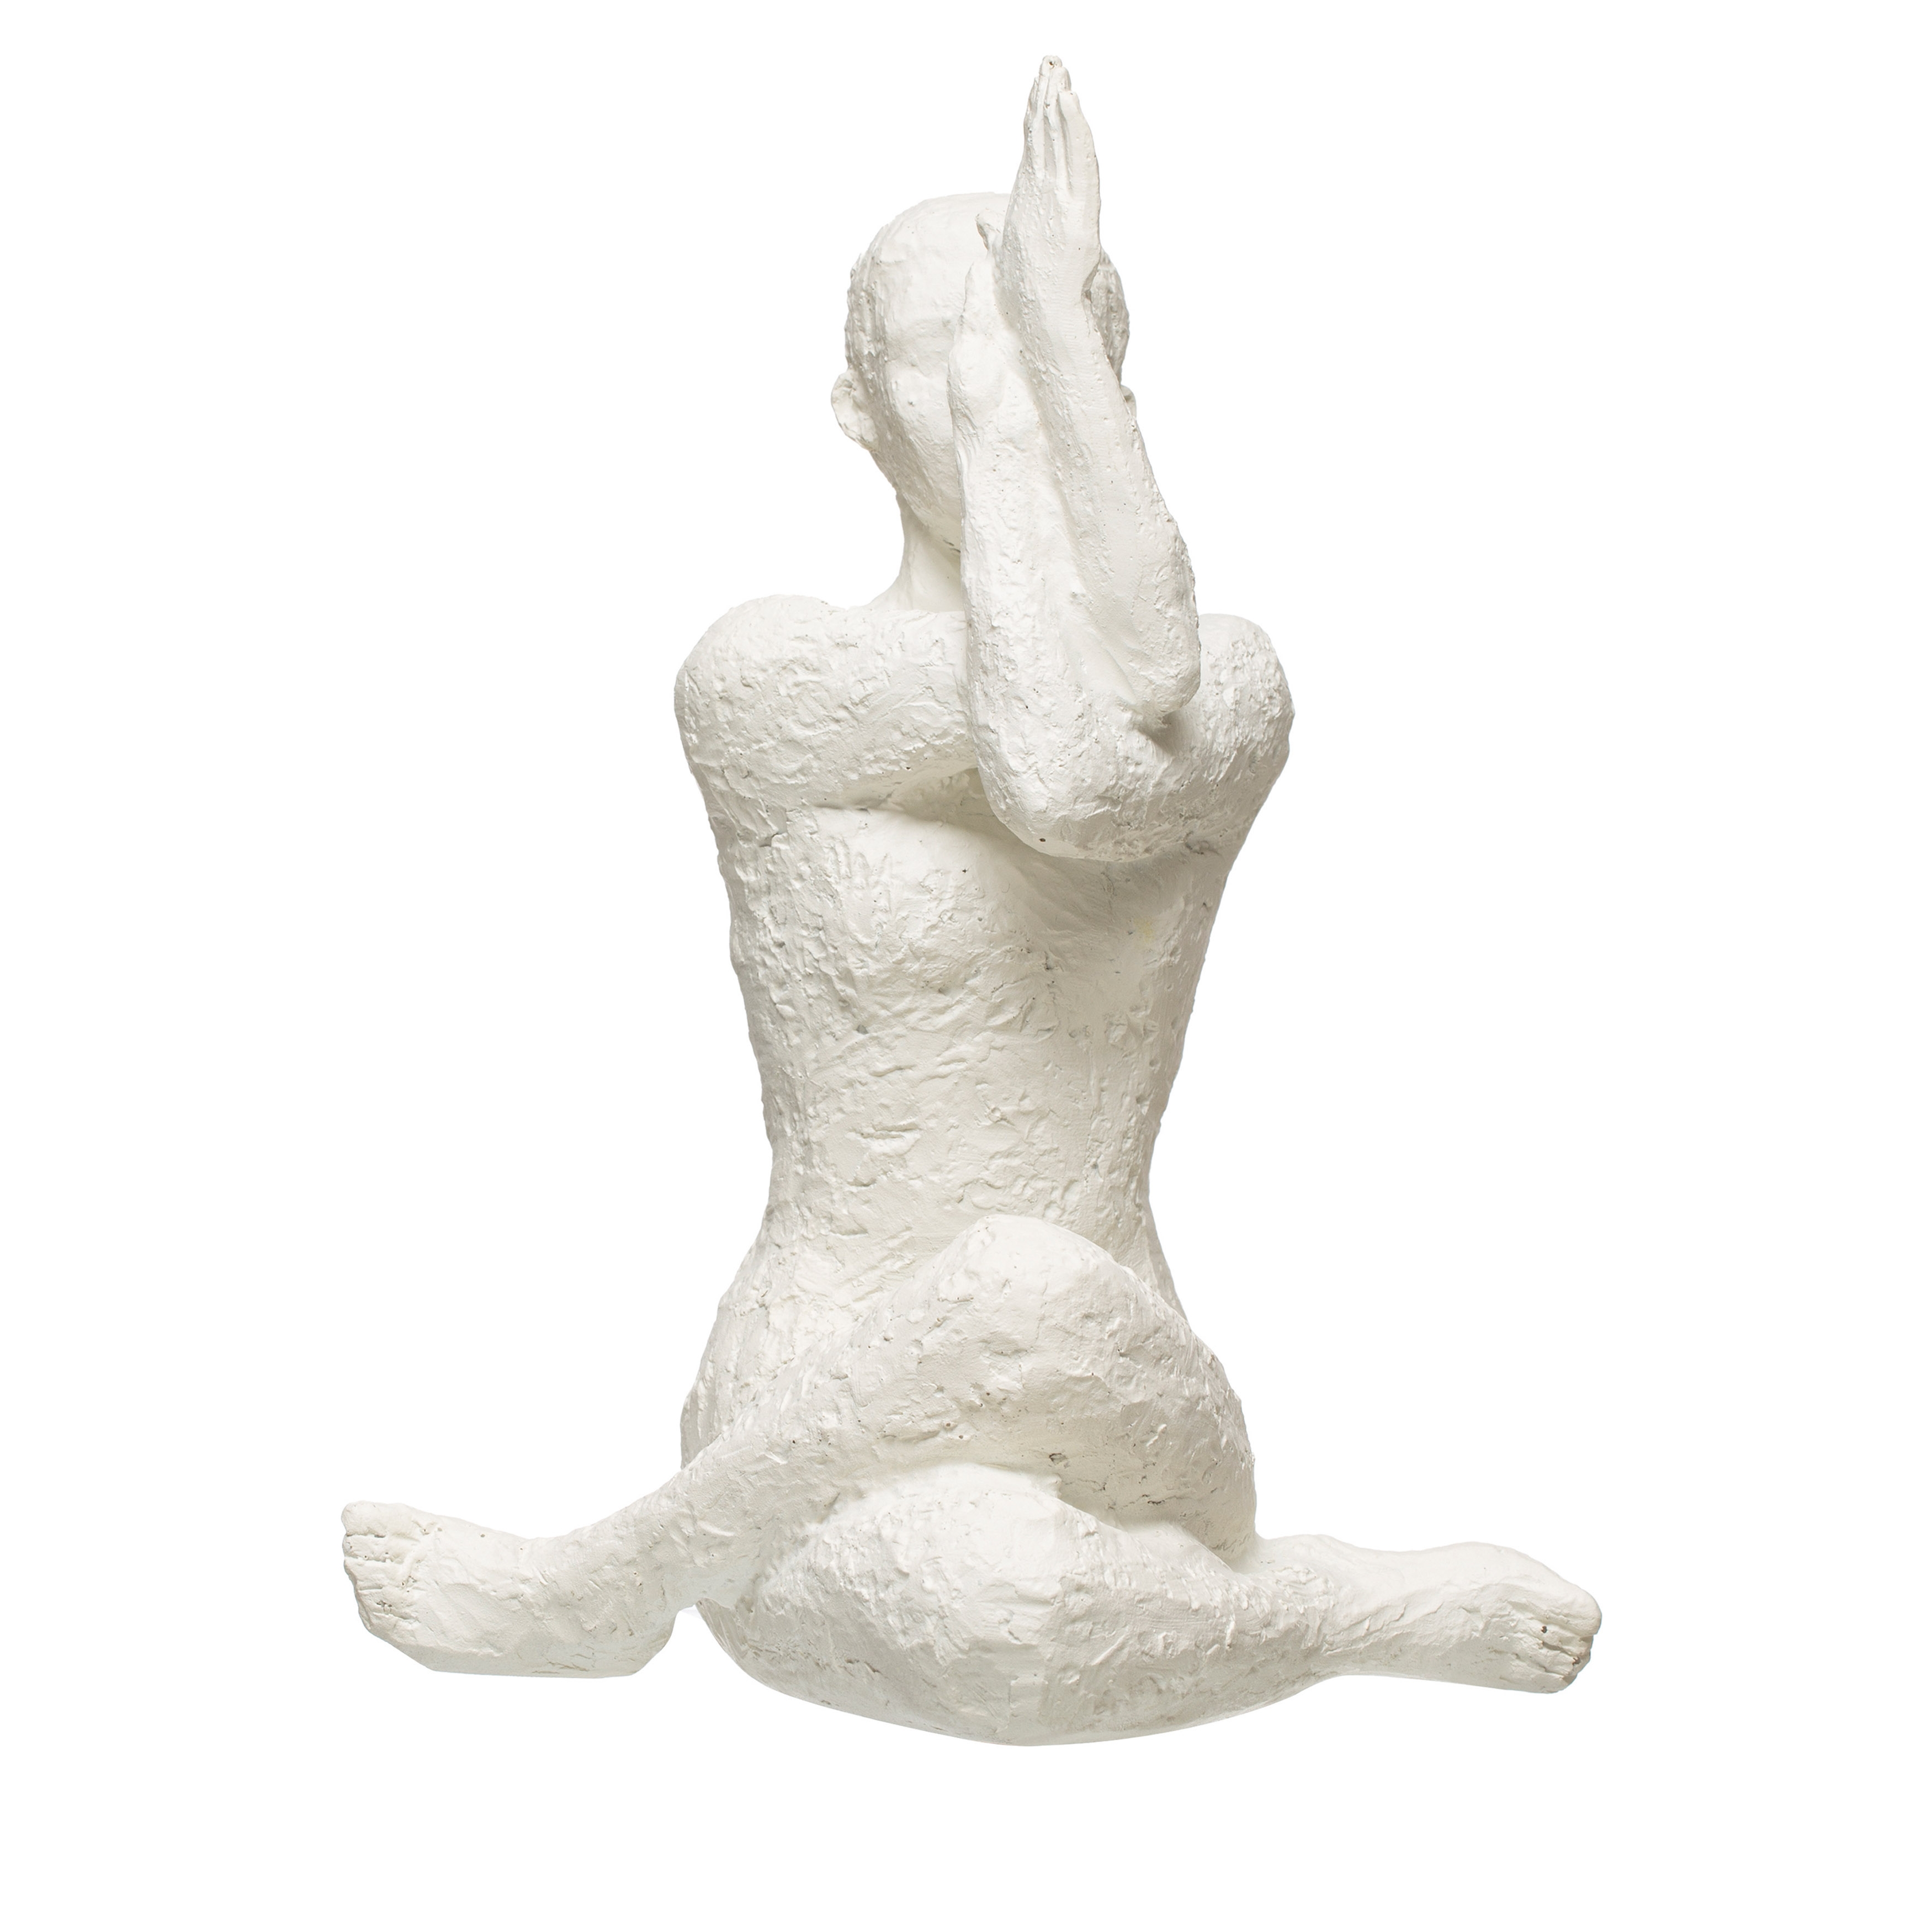 Boho-Inspired Resin Yoga Figure with Volcano Finish Accent Piece - Image 0